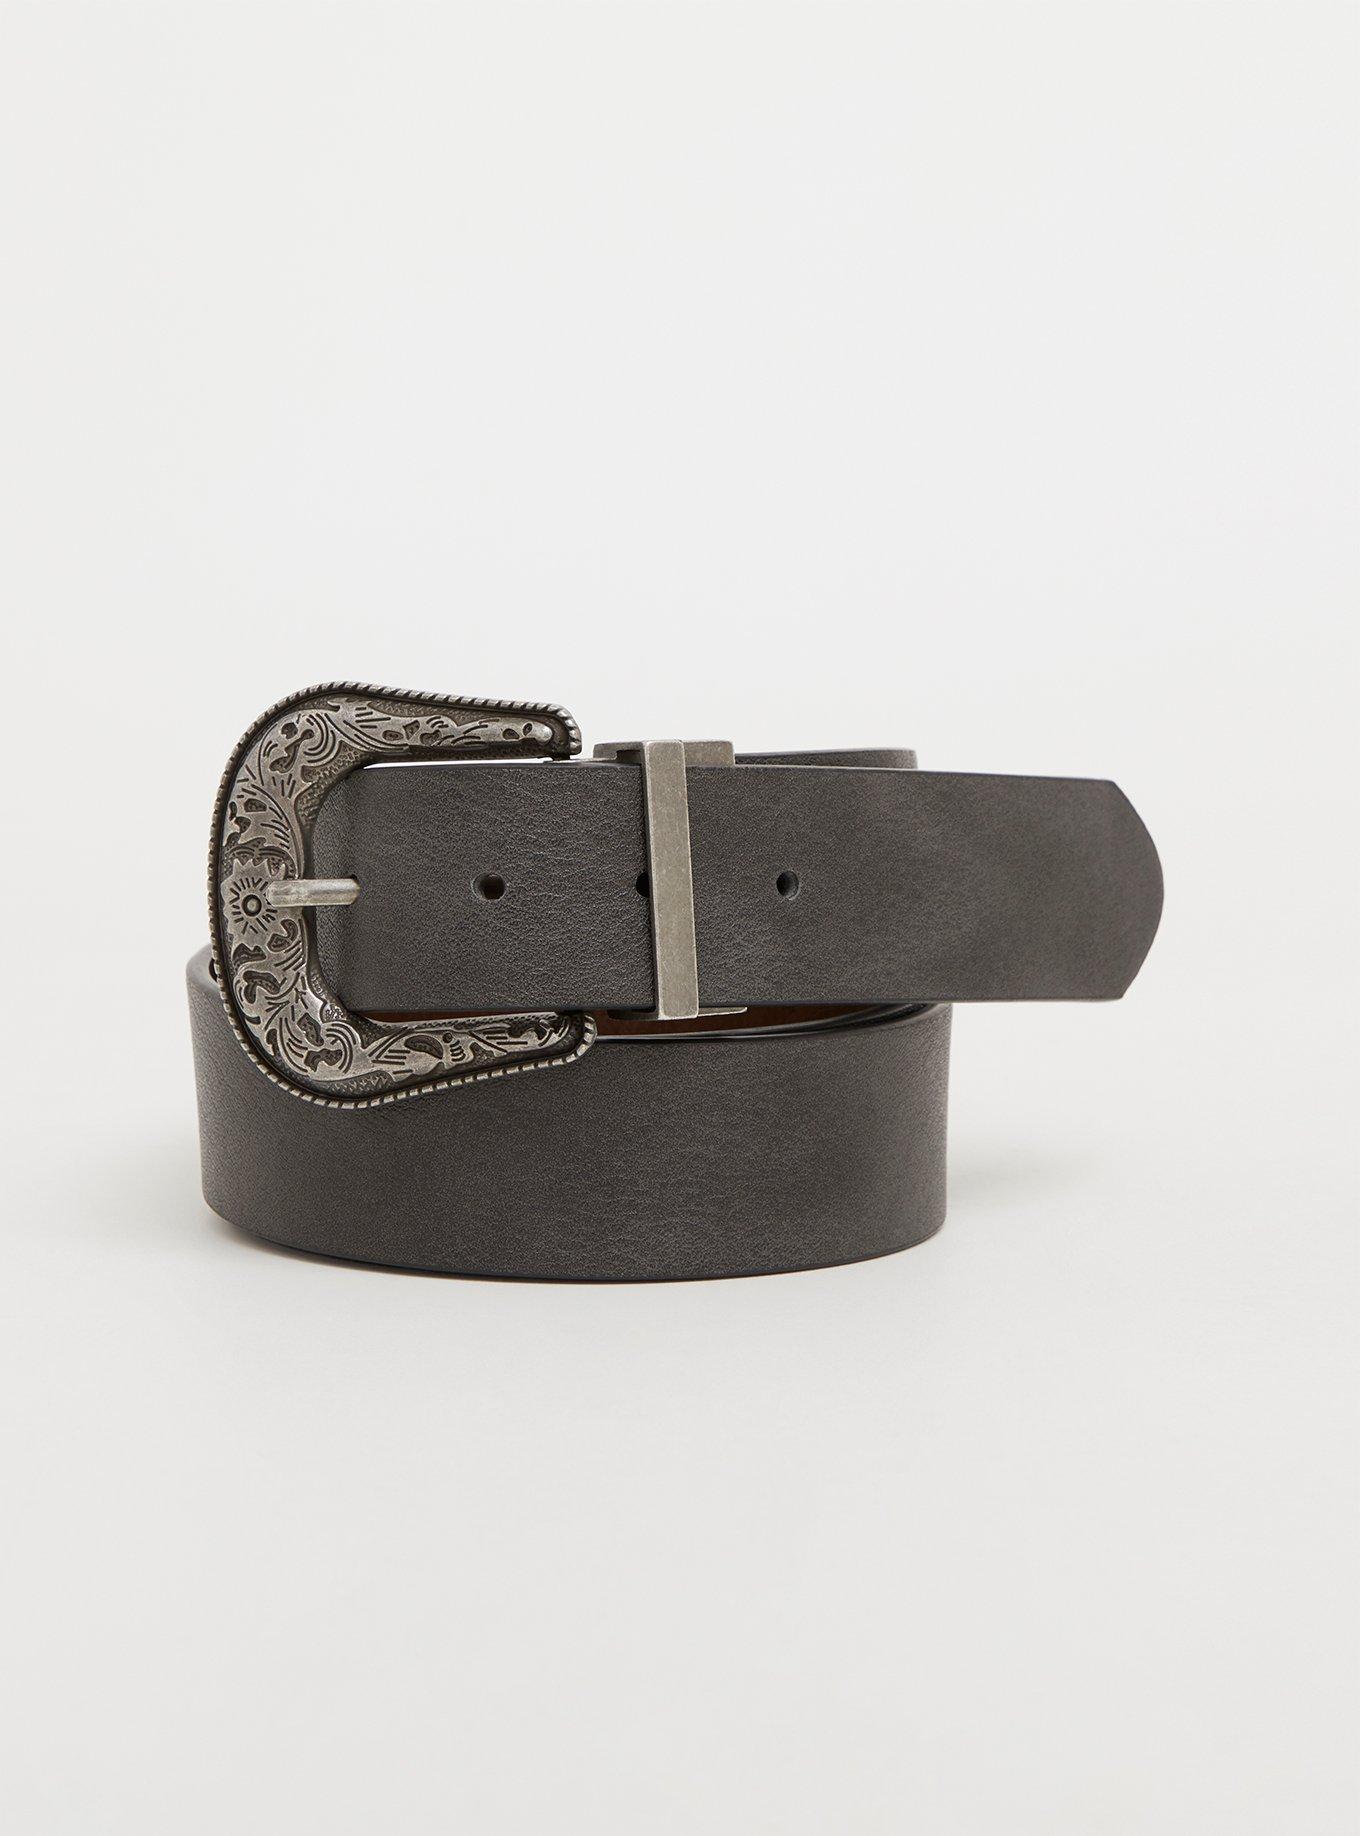 Plus Size Western Belts – The Curvy Ranch Wife